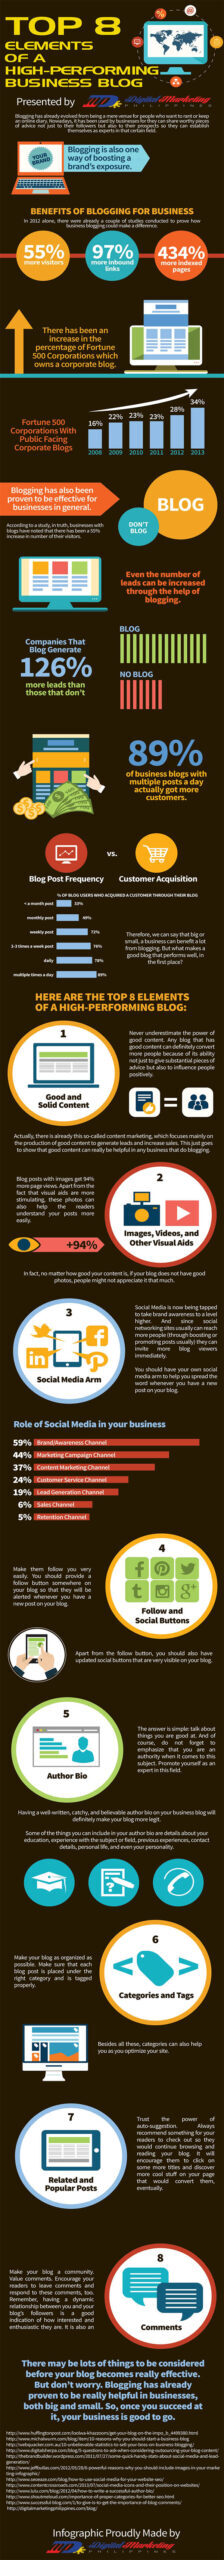 Top 8 Elements of a High-Performing Business Blog (Infographic) - An Infographic from Digital Marketing Philippines